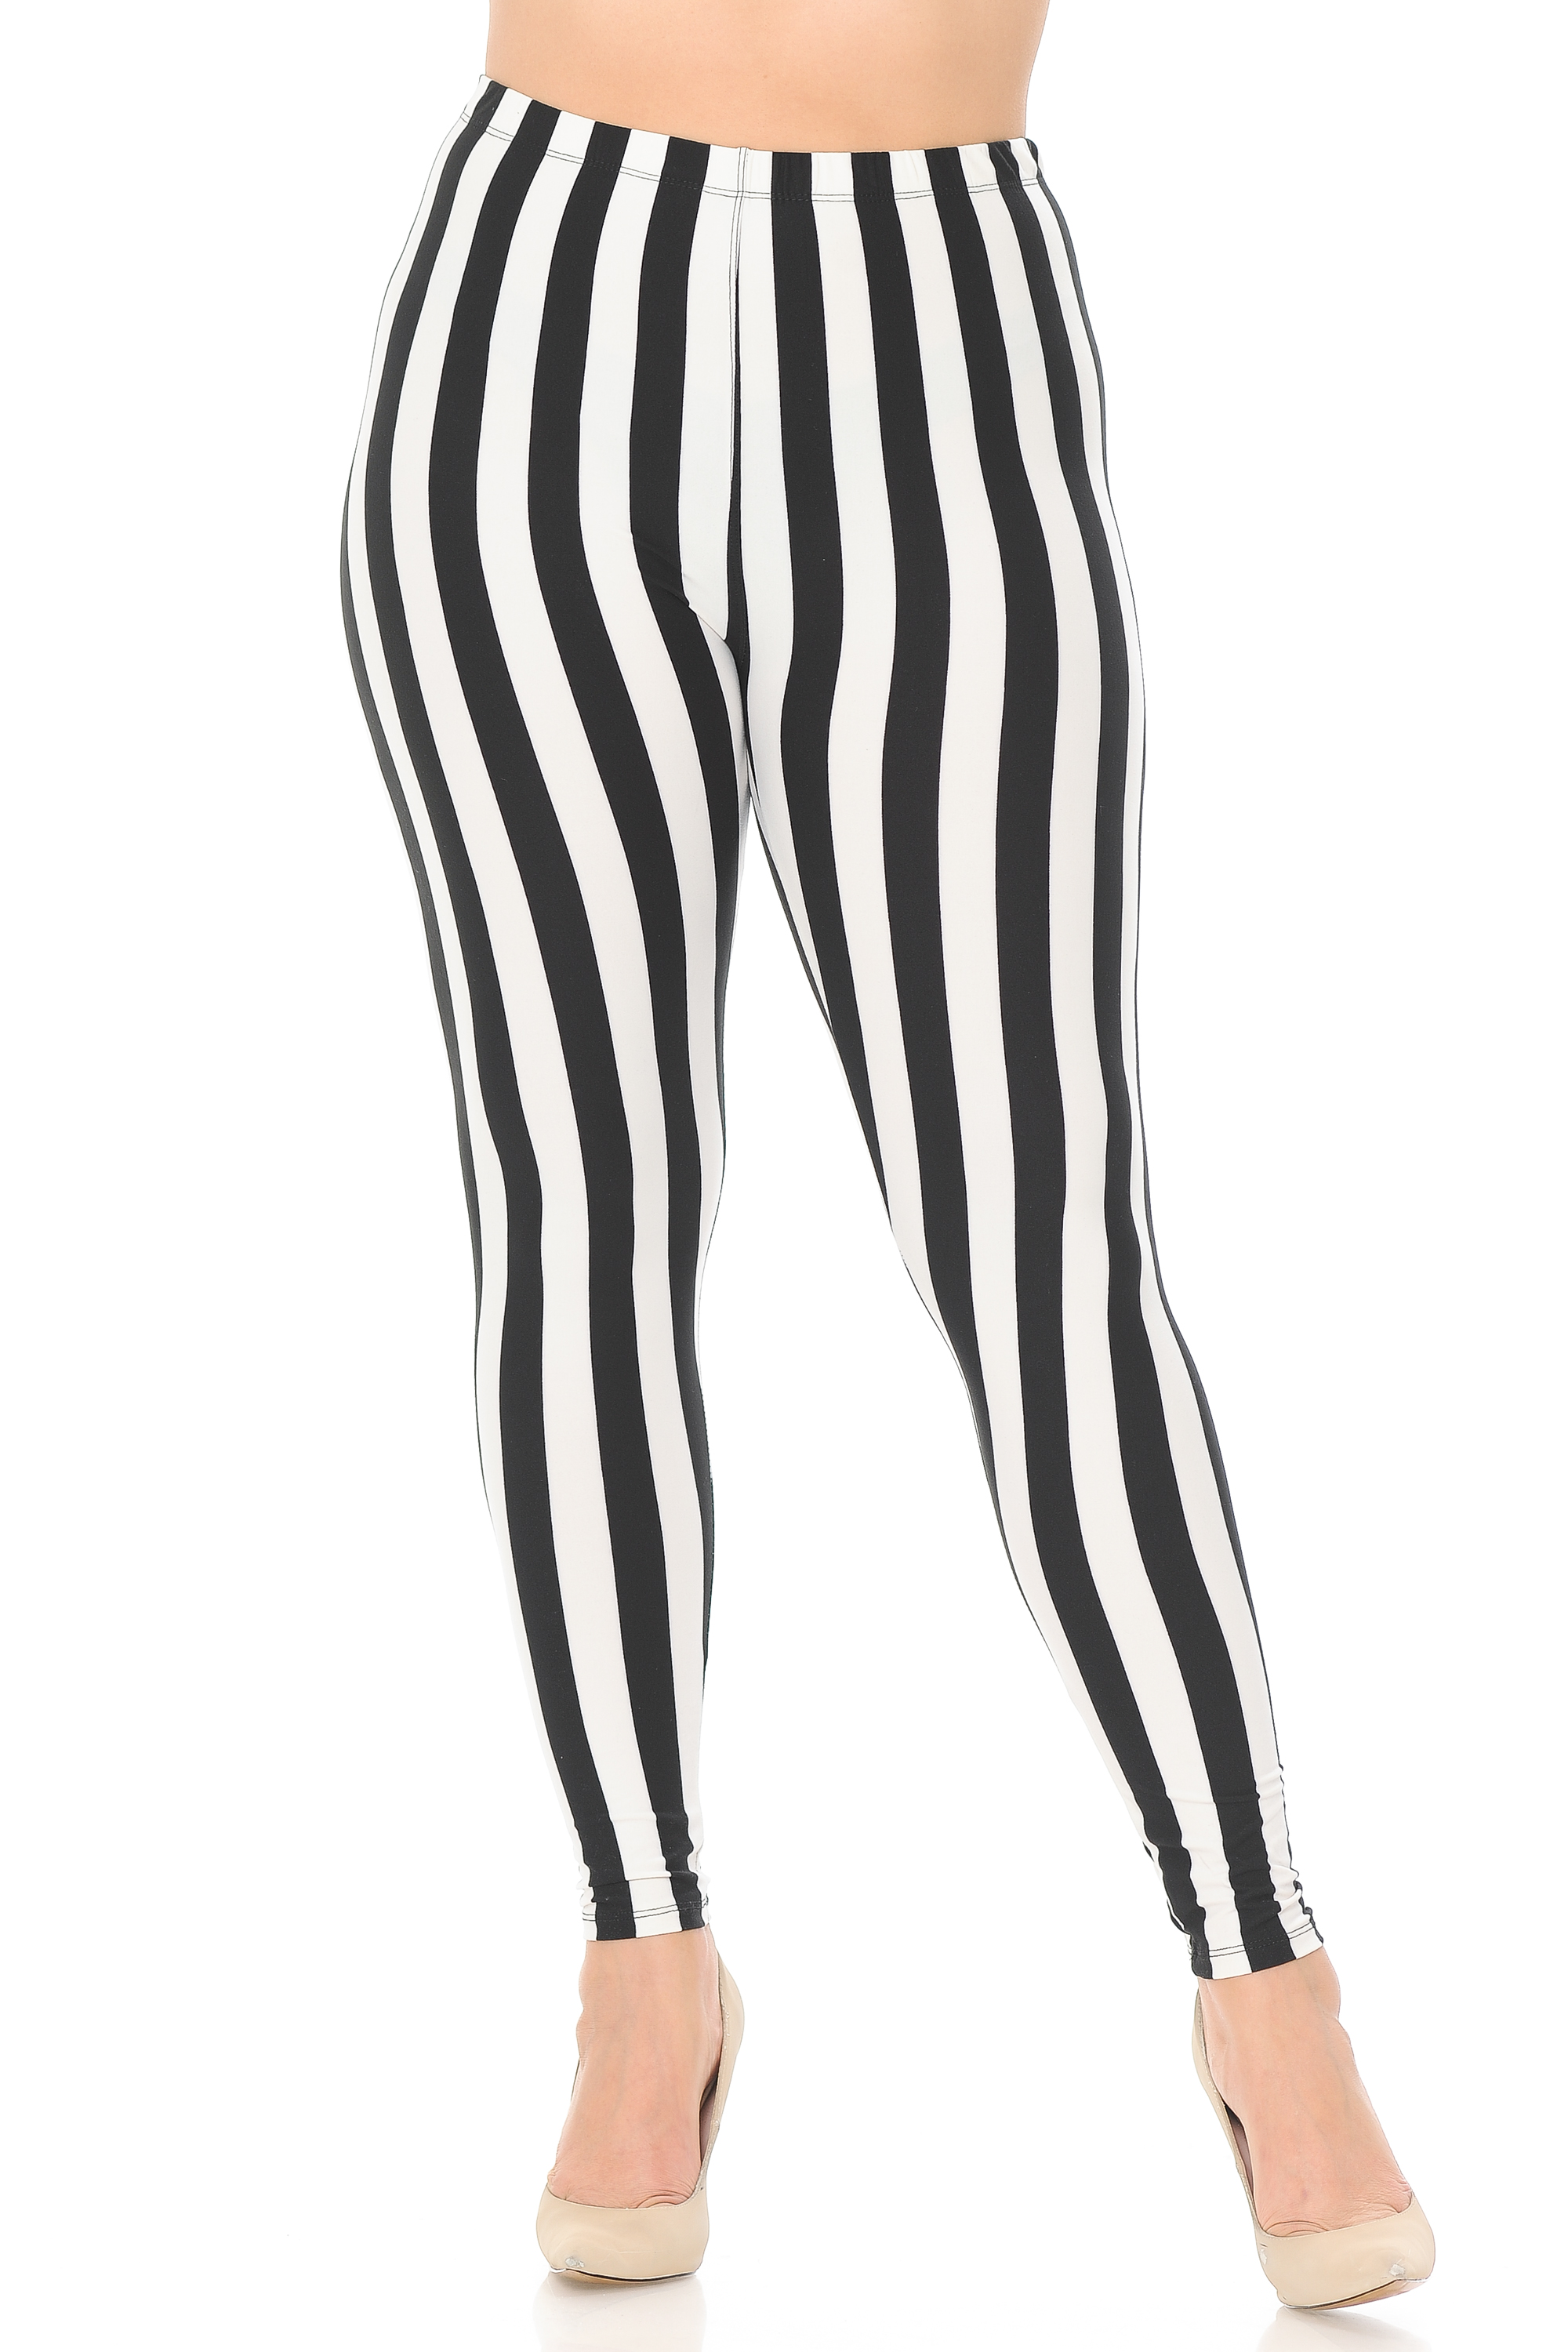 Wholesale Buttery Smooth Black and White Wide Stripe Plus Size Leggings